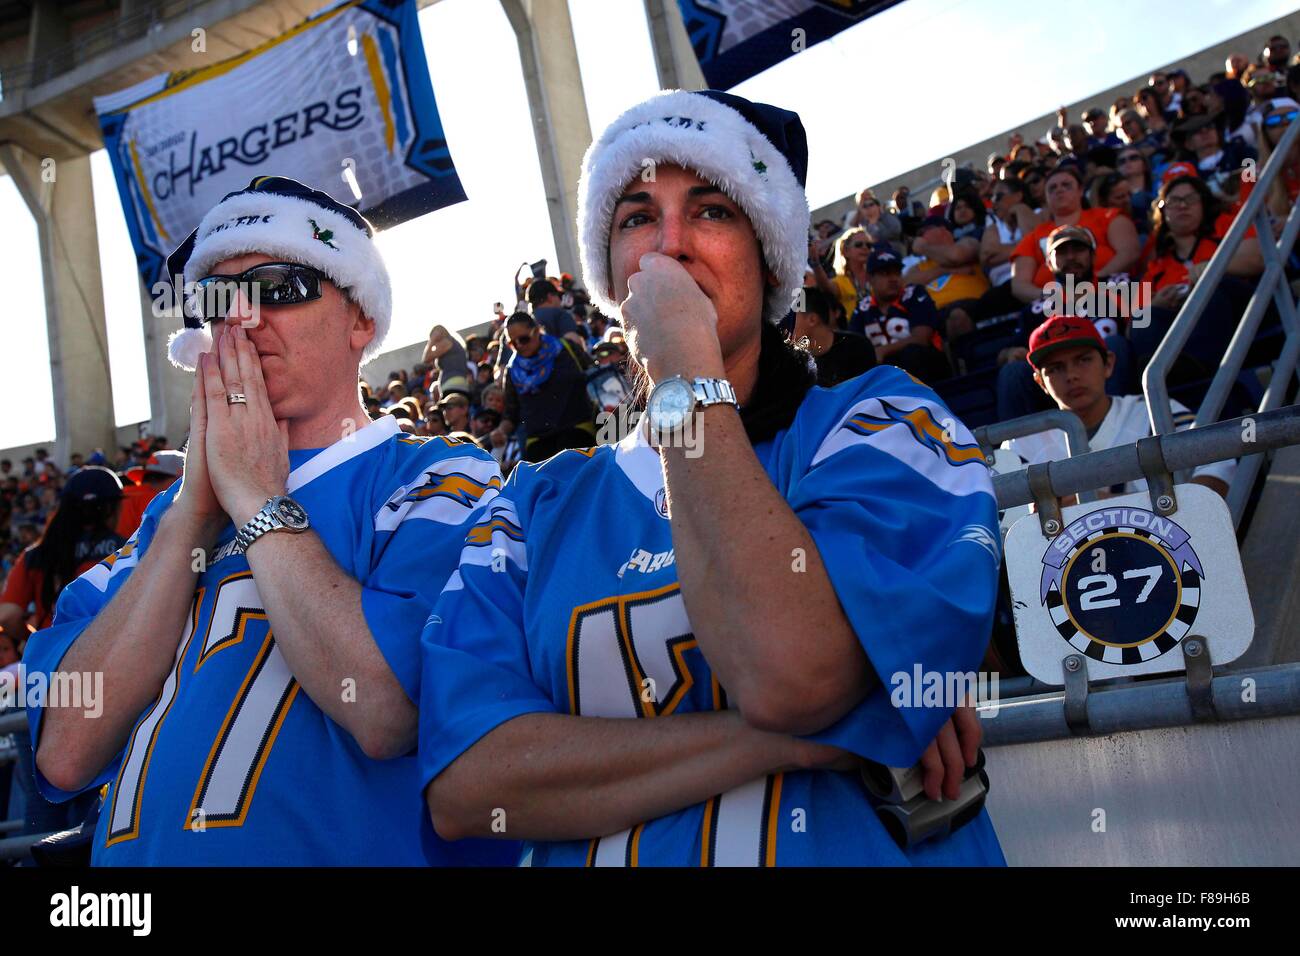 San Diego, CA, USA. 6th Dec, 2015. SAN DIEGO The San Diego Chargers took on the Denver Broncos in their next-to-last-home game at Qualcomm Stadium. As is usual with the Chargers, there were at least as many Broncos fans going to the game.|Patrick Vaughan, and wife Laura Vaughan, react with sympathy as they watch injured Charger '.Dontrelle Inman being carted off the field with a neck injury that required a neck and back brace.| John Gastaldo/San Diego Union-Tribune © John Gastaldo/U-T San Diego/ZUMA Wire/Alamy Live News Stock Photo